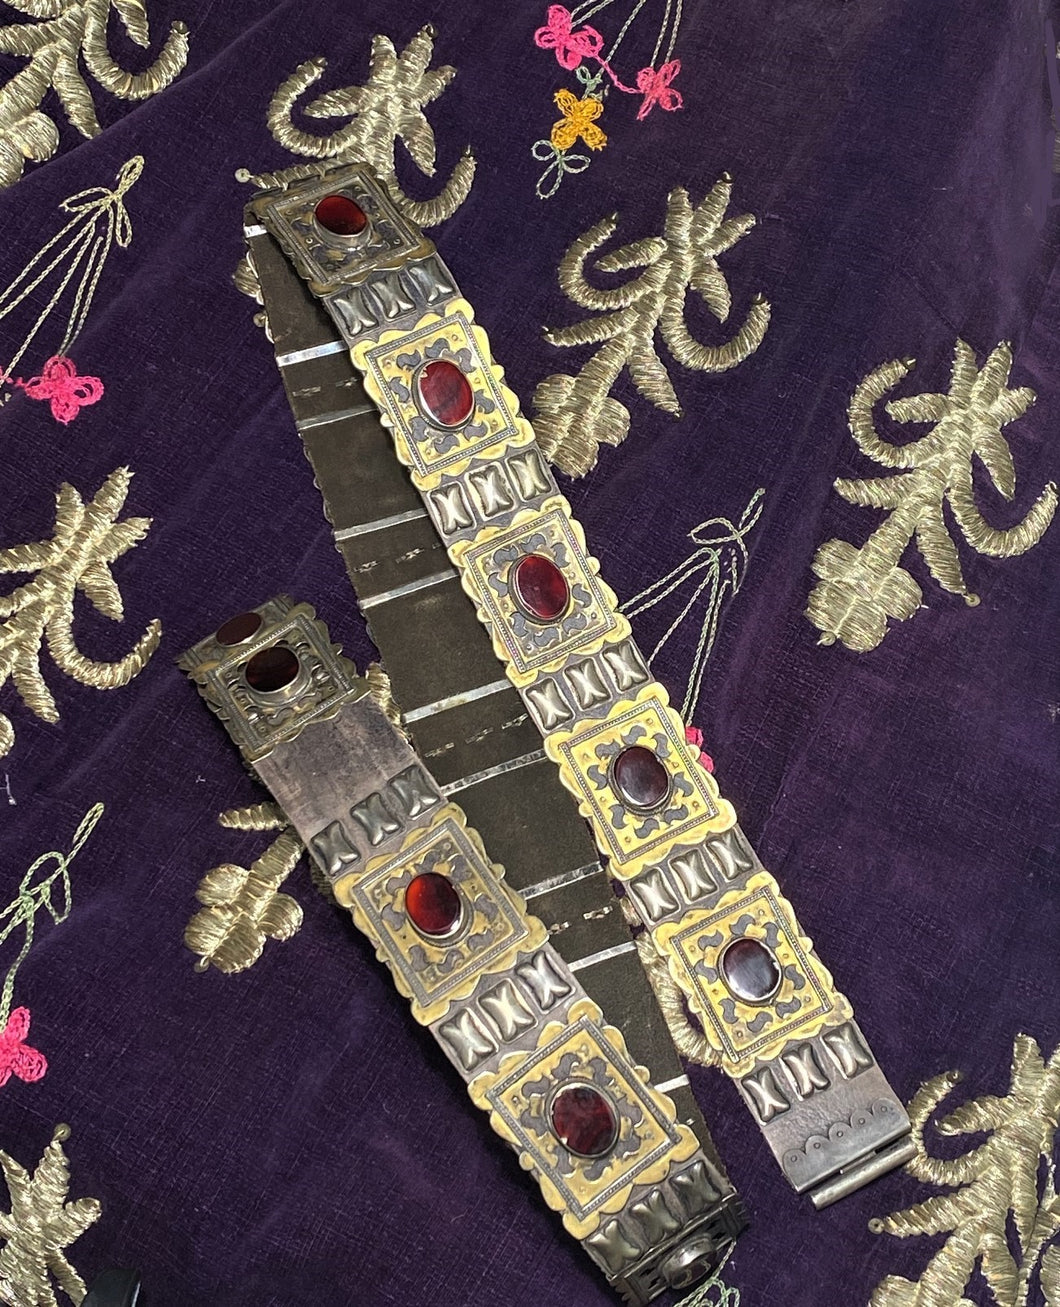 Closer view of gilt silver and carnelian sections of Turkoman belt